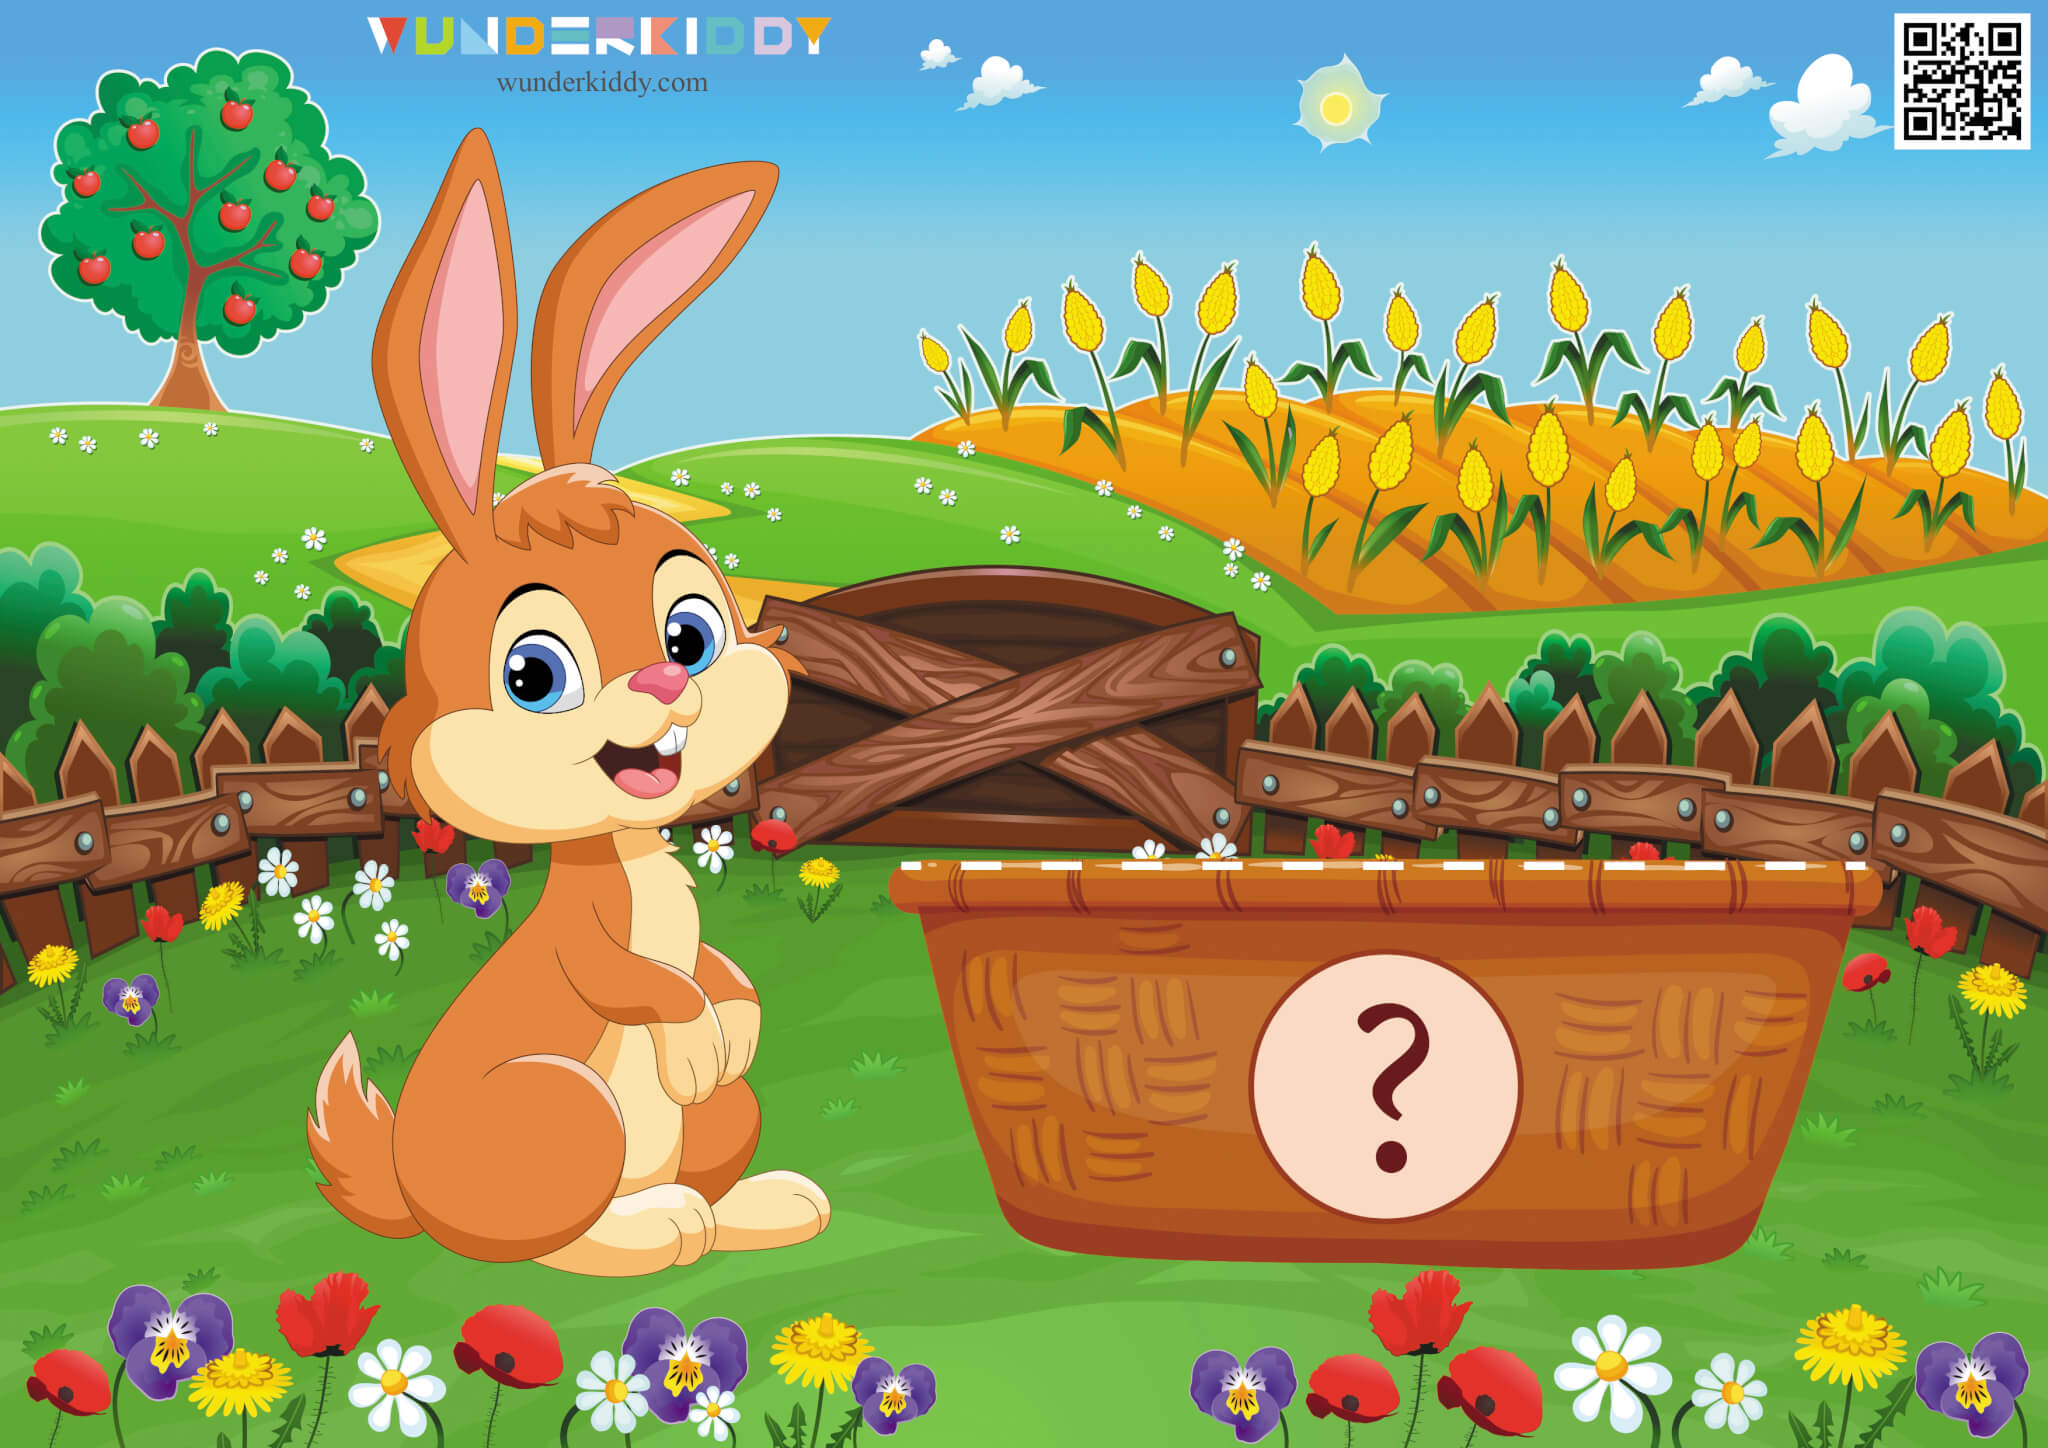 Counting Board Game Bunny and Carrot - Image 2